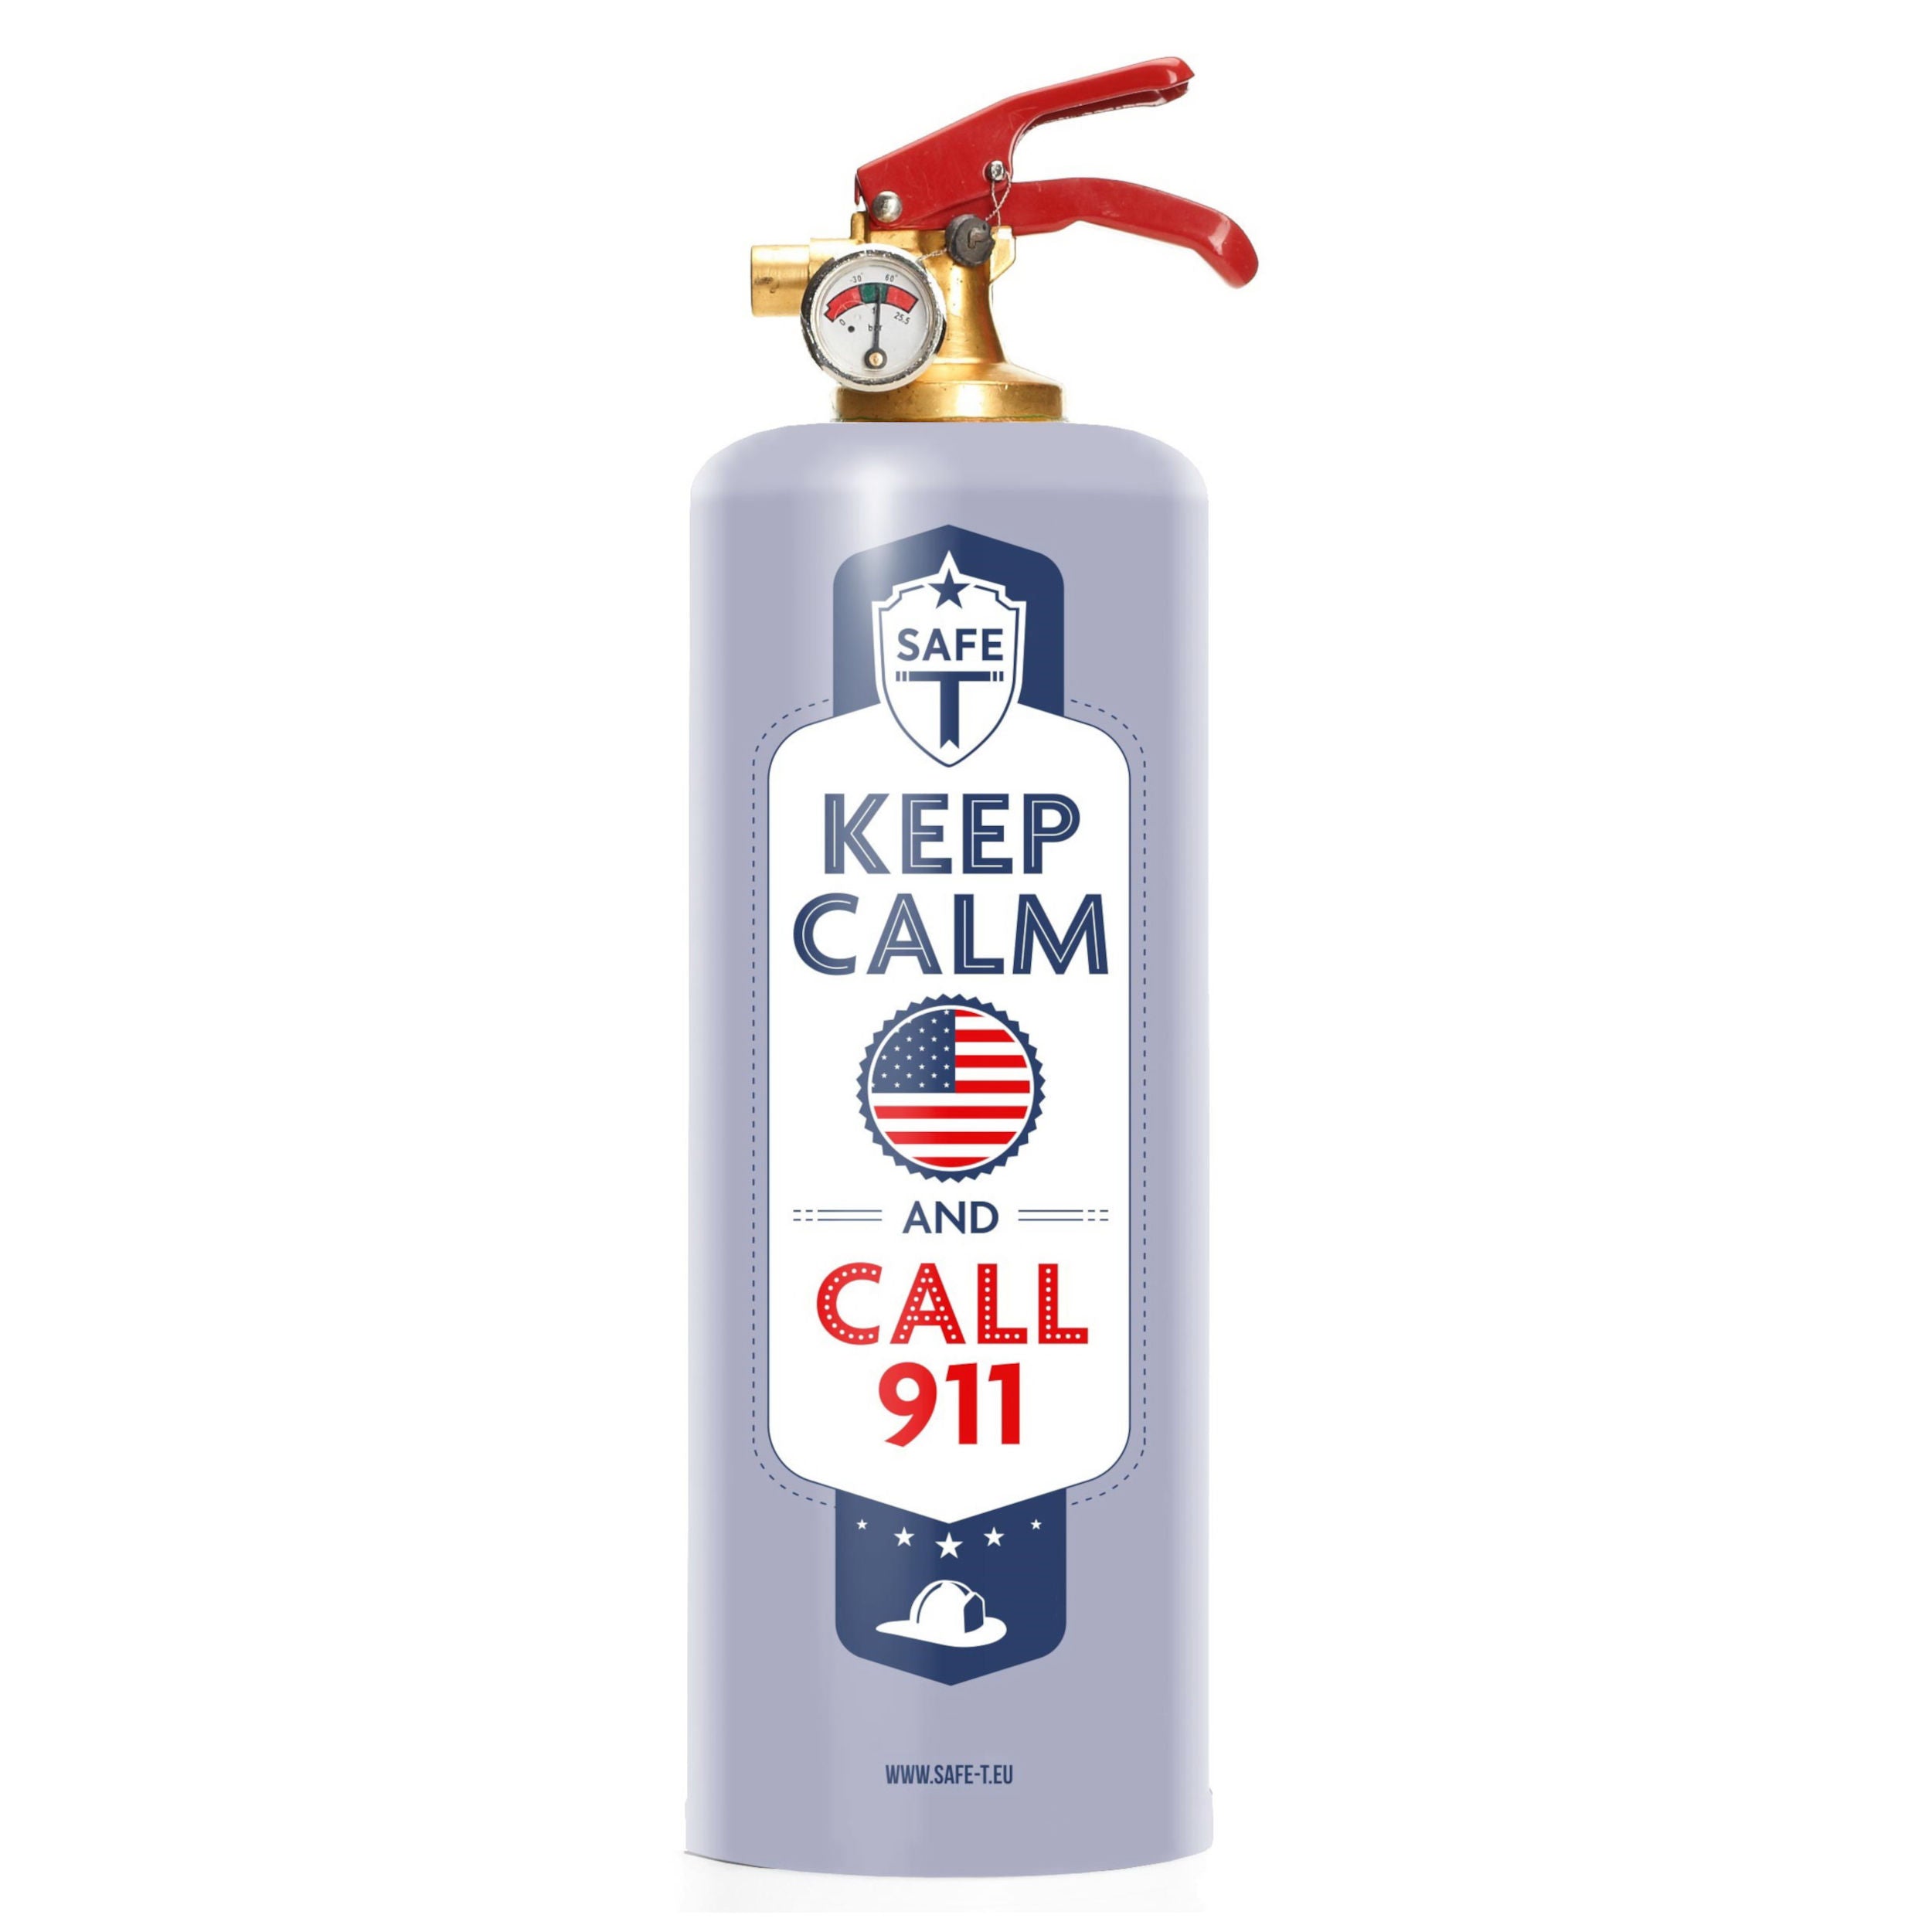 CALL 911 - SAFE-T.US